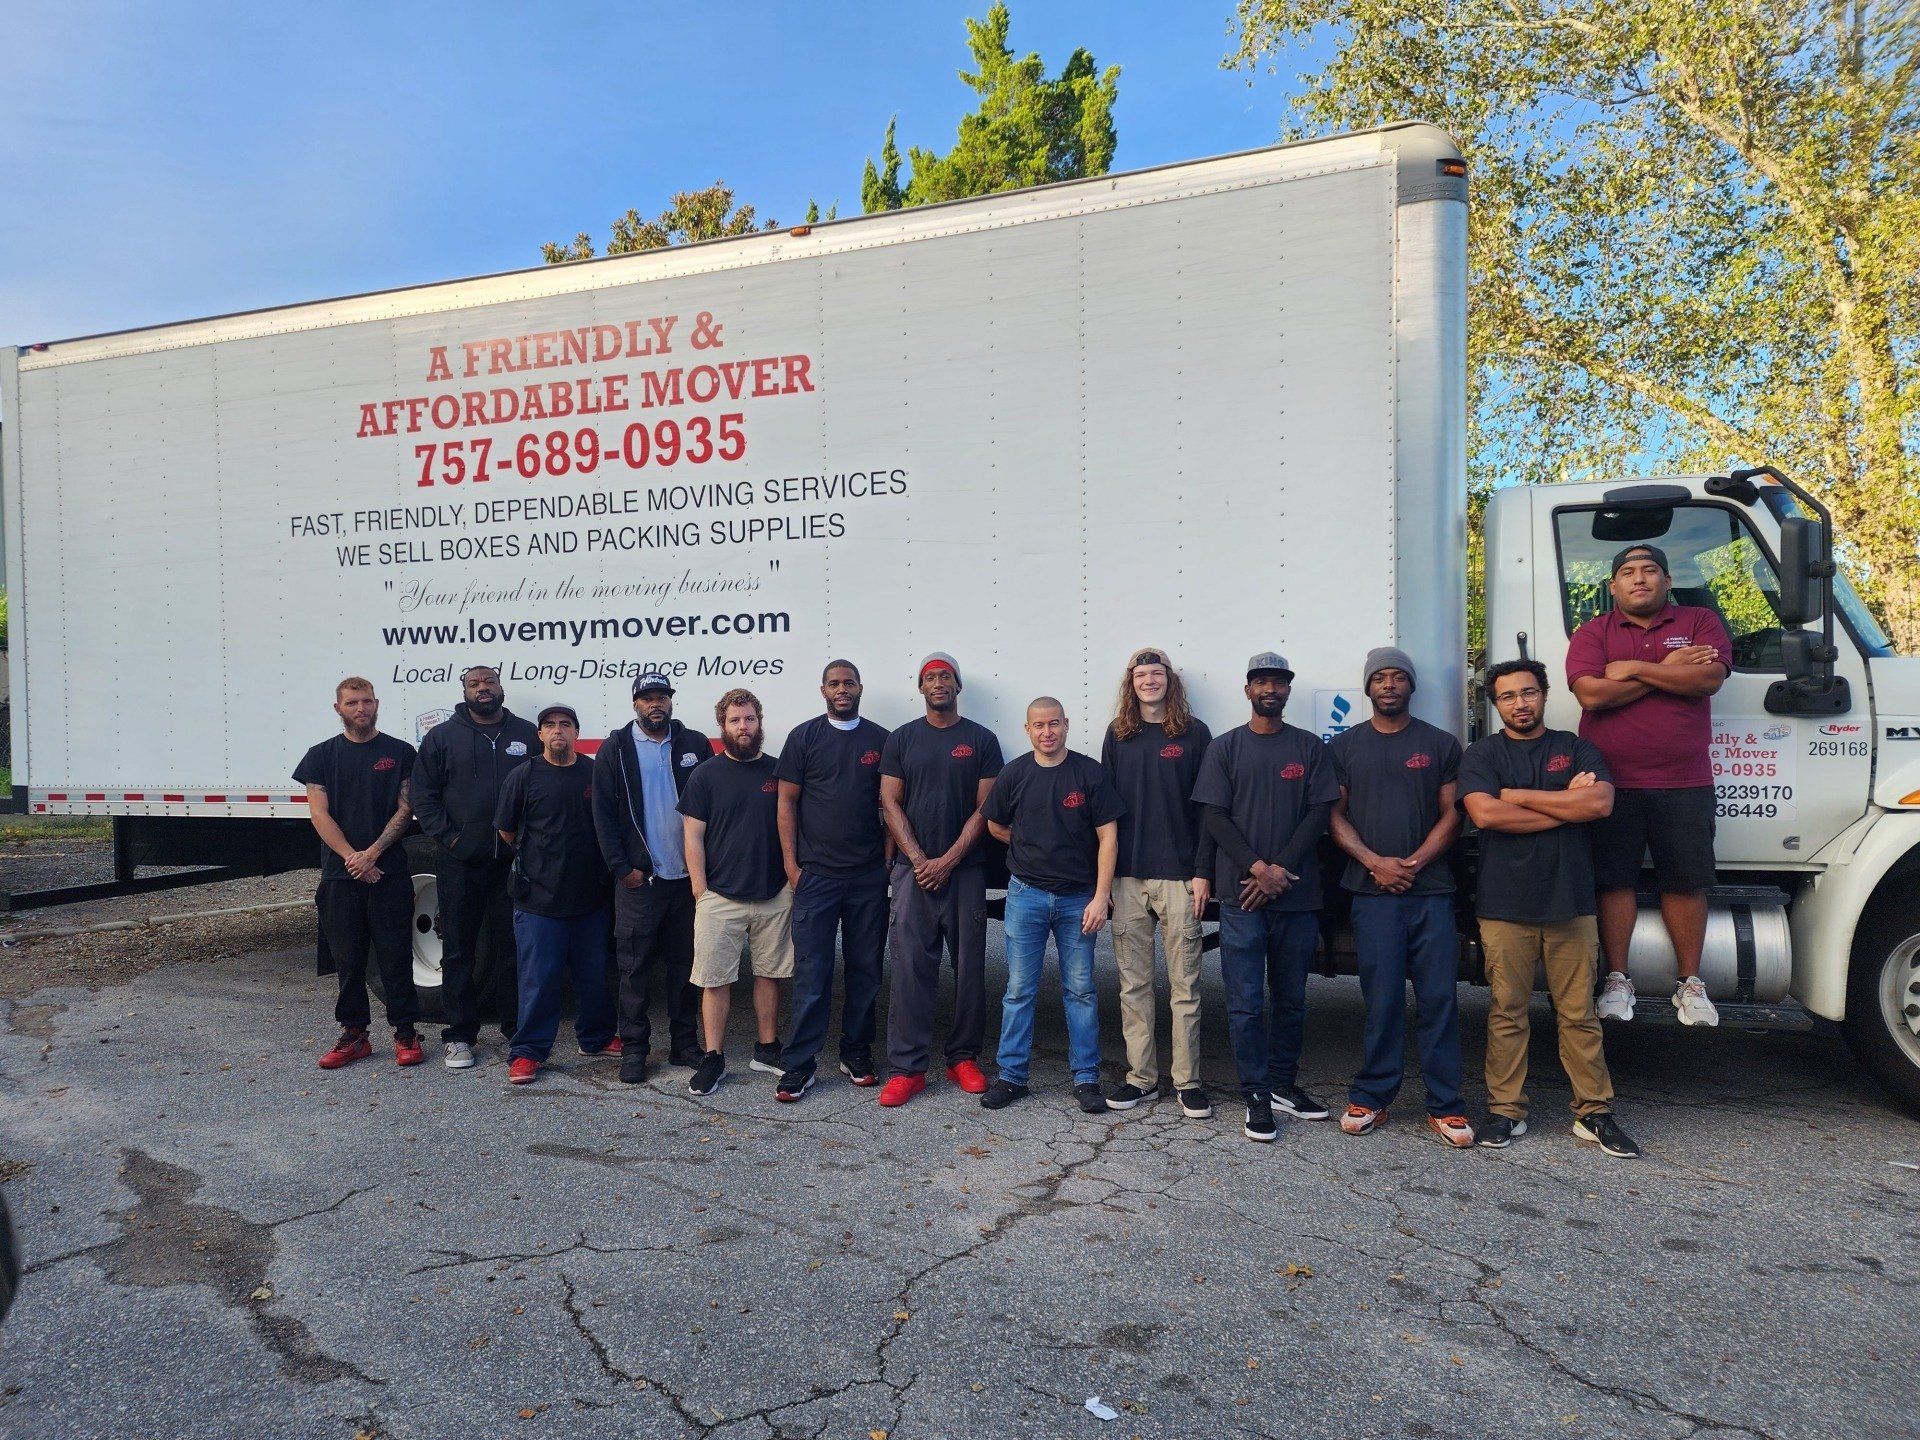 A Group Of People Standing Beside The Truck – Virginia Beach, VA – A Friendly & Affordable Mover